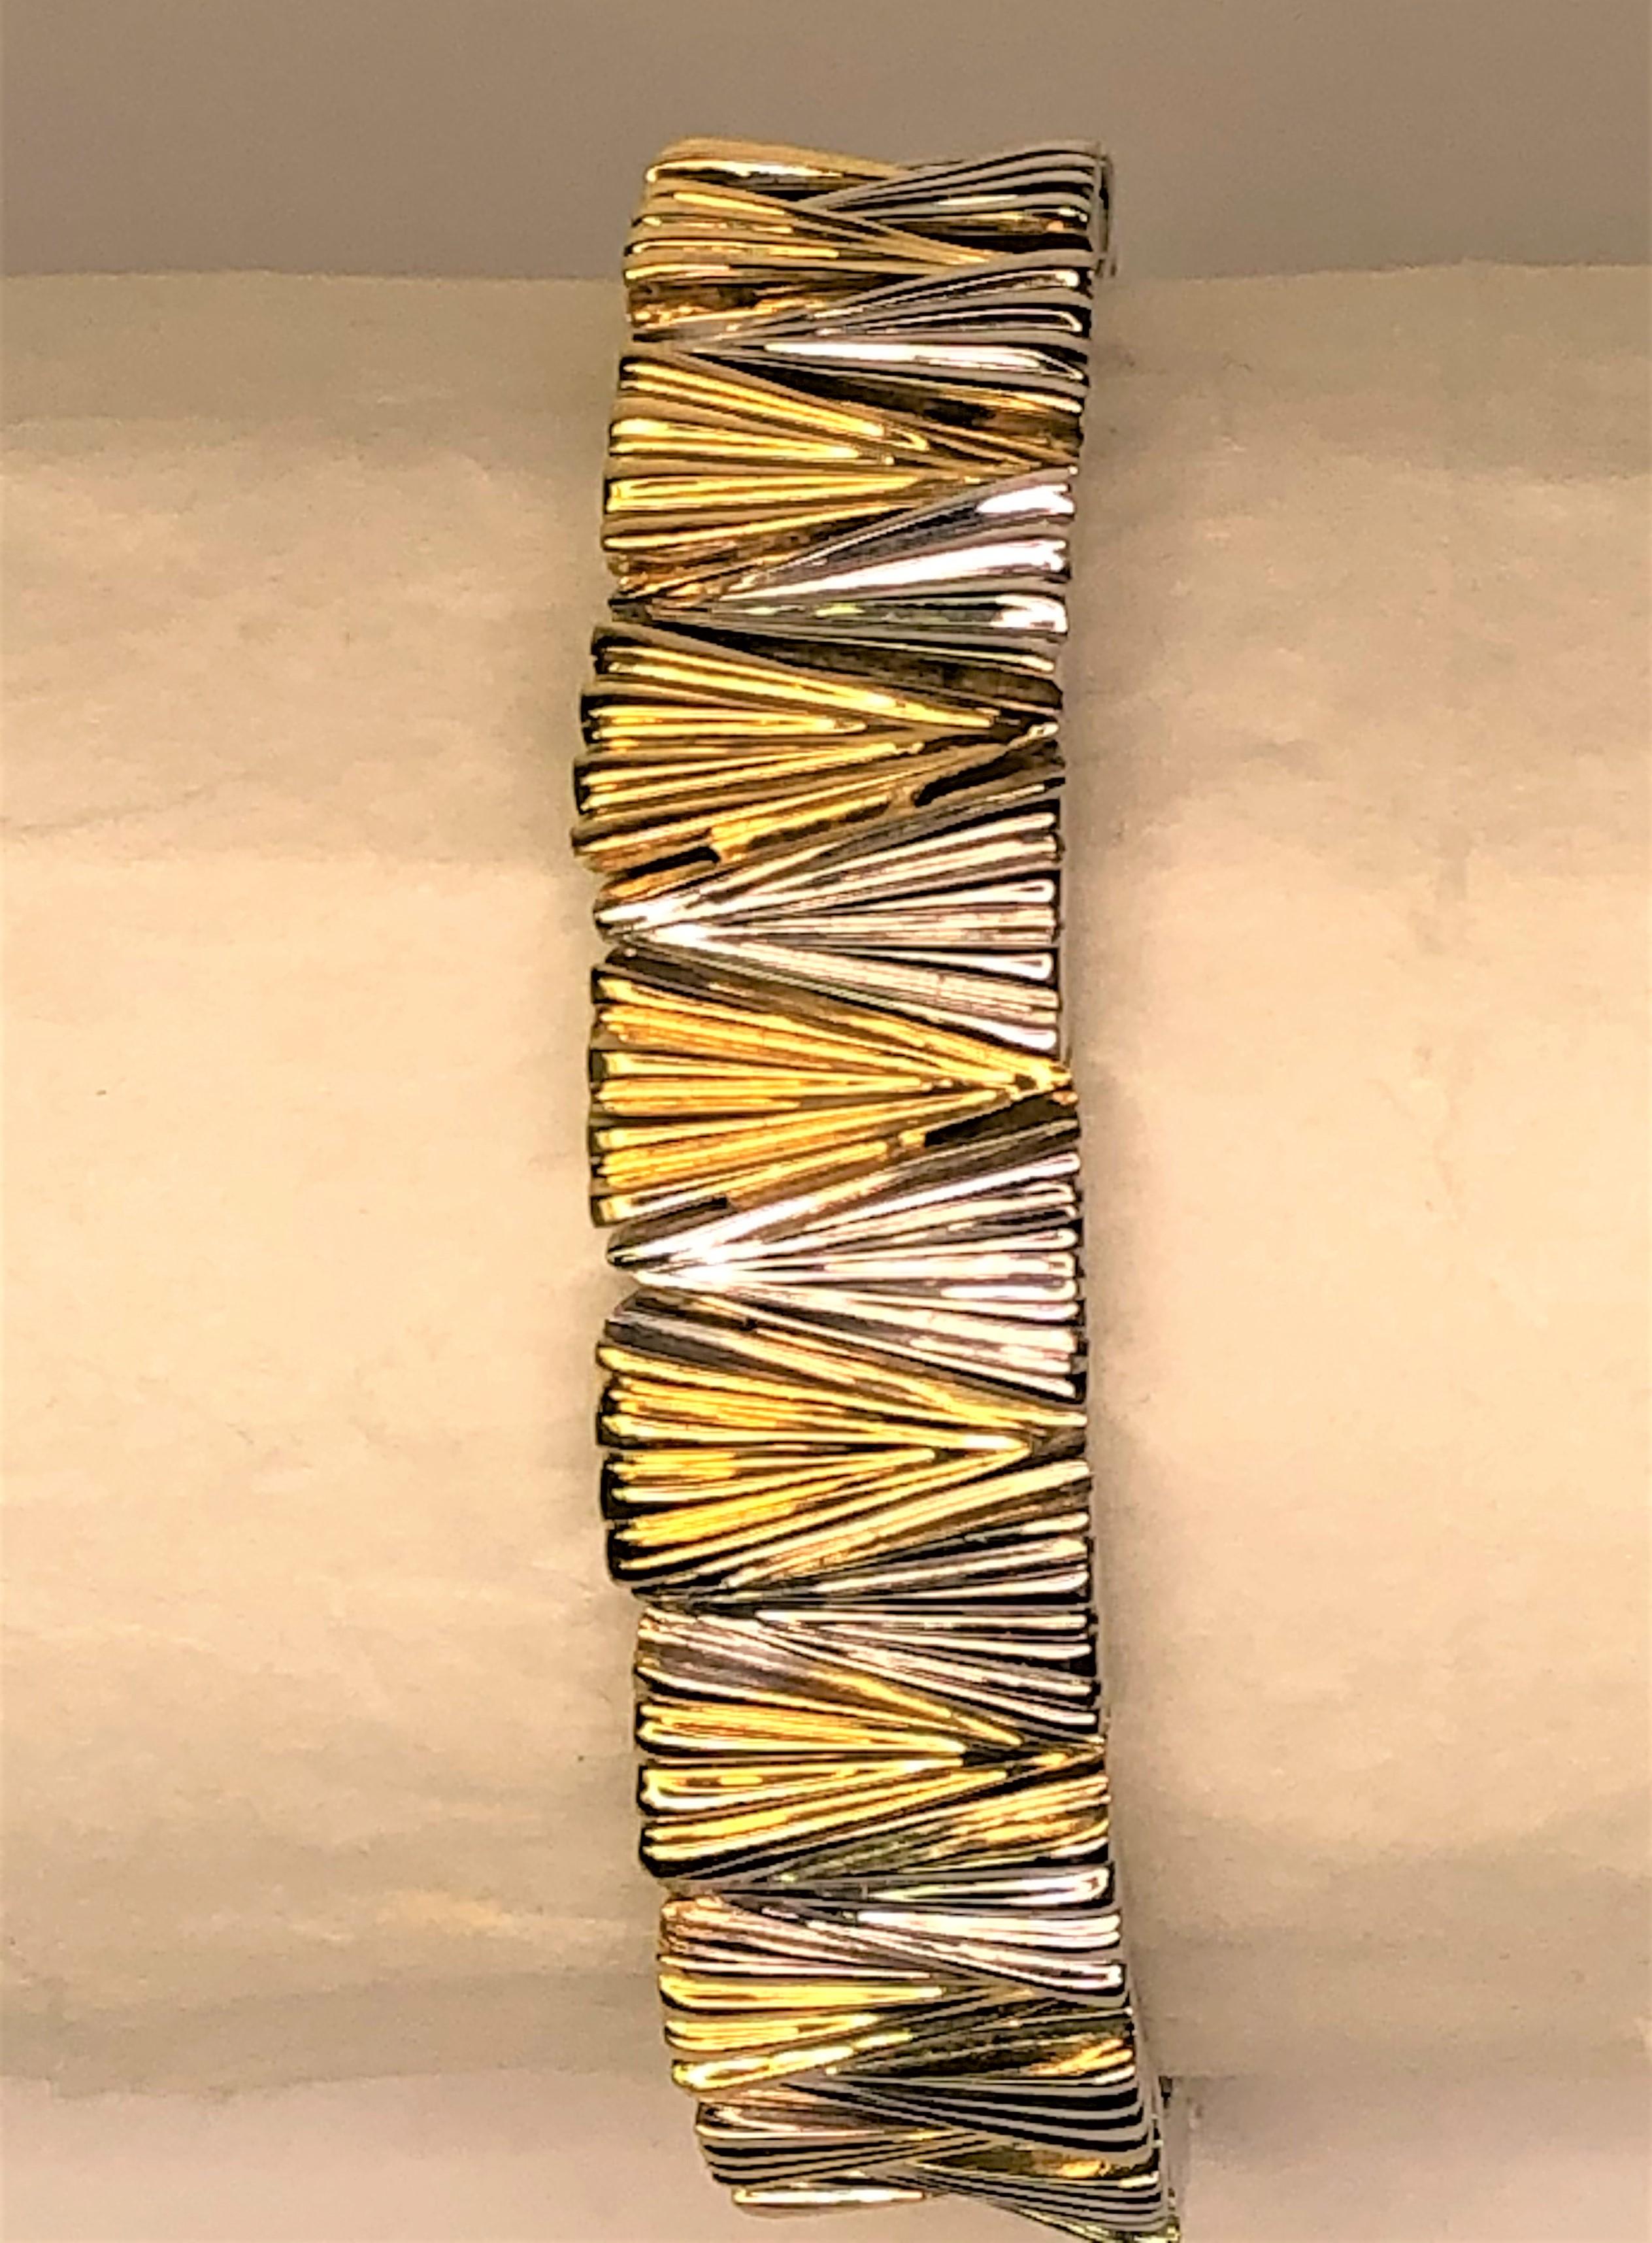 This bracelet is fabulous and will shine no matter what you are wearing!
Designer Sal Praschnik
18 karat yellow and white gold, weighing approximately 49.2dwt
35 triangular shaped pieces alternating in white and yellow gold plus white gold